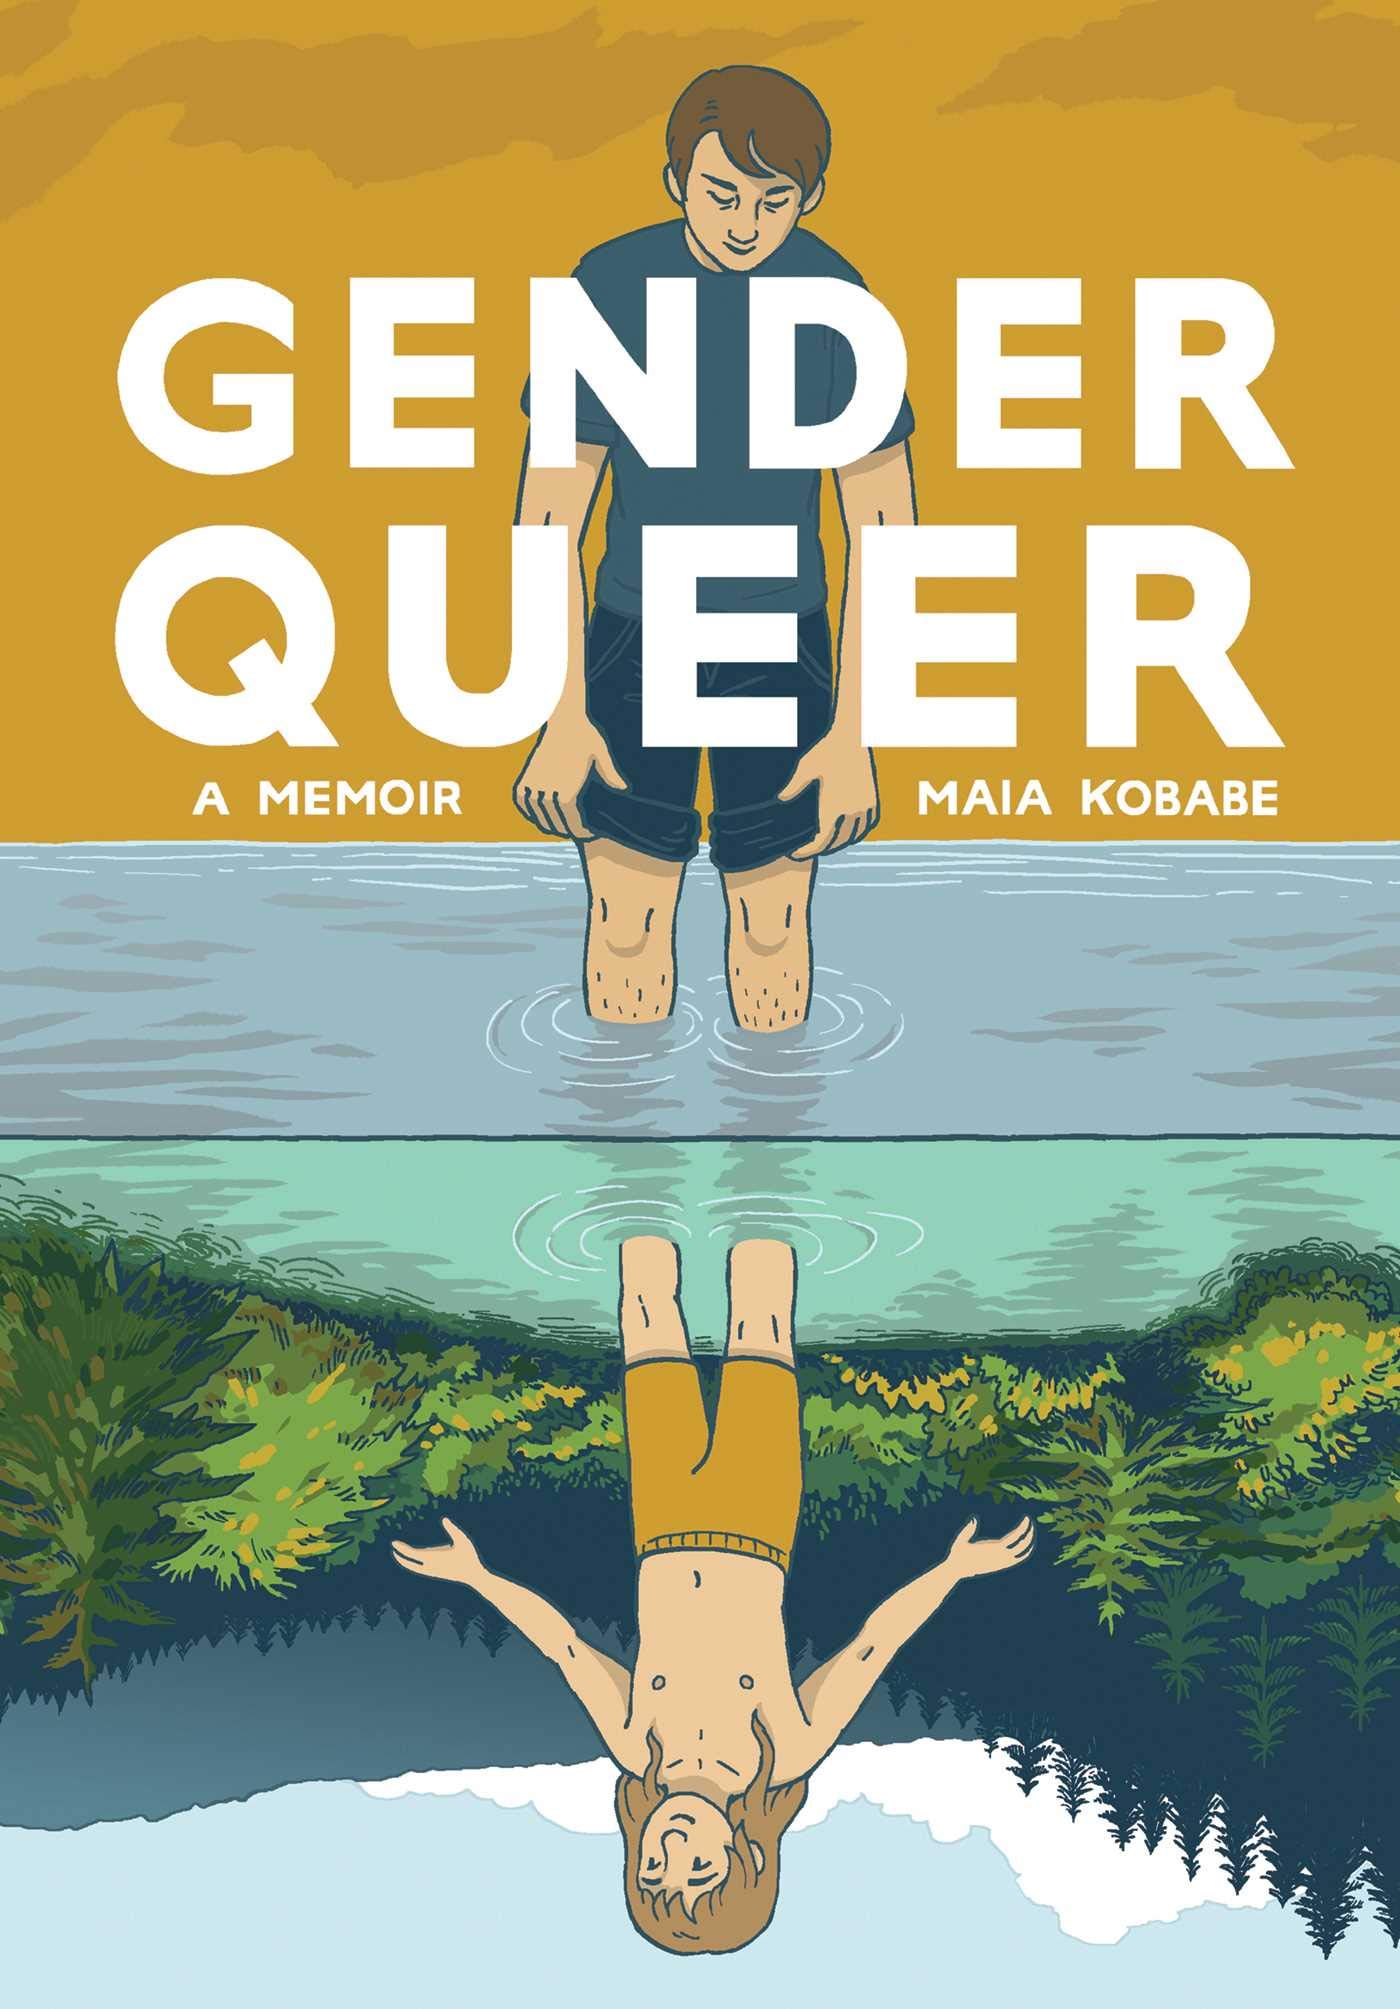 Cover for GENDER QUEER by Maia Kobabe